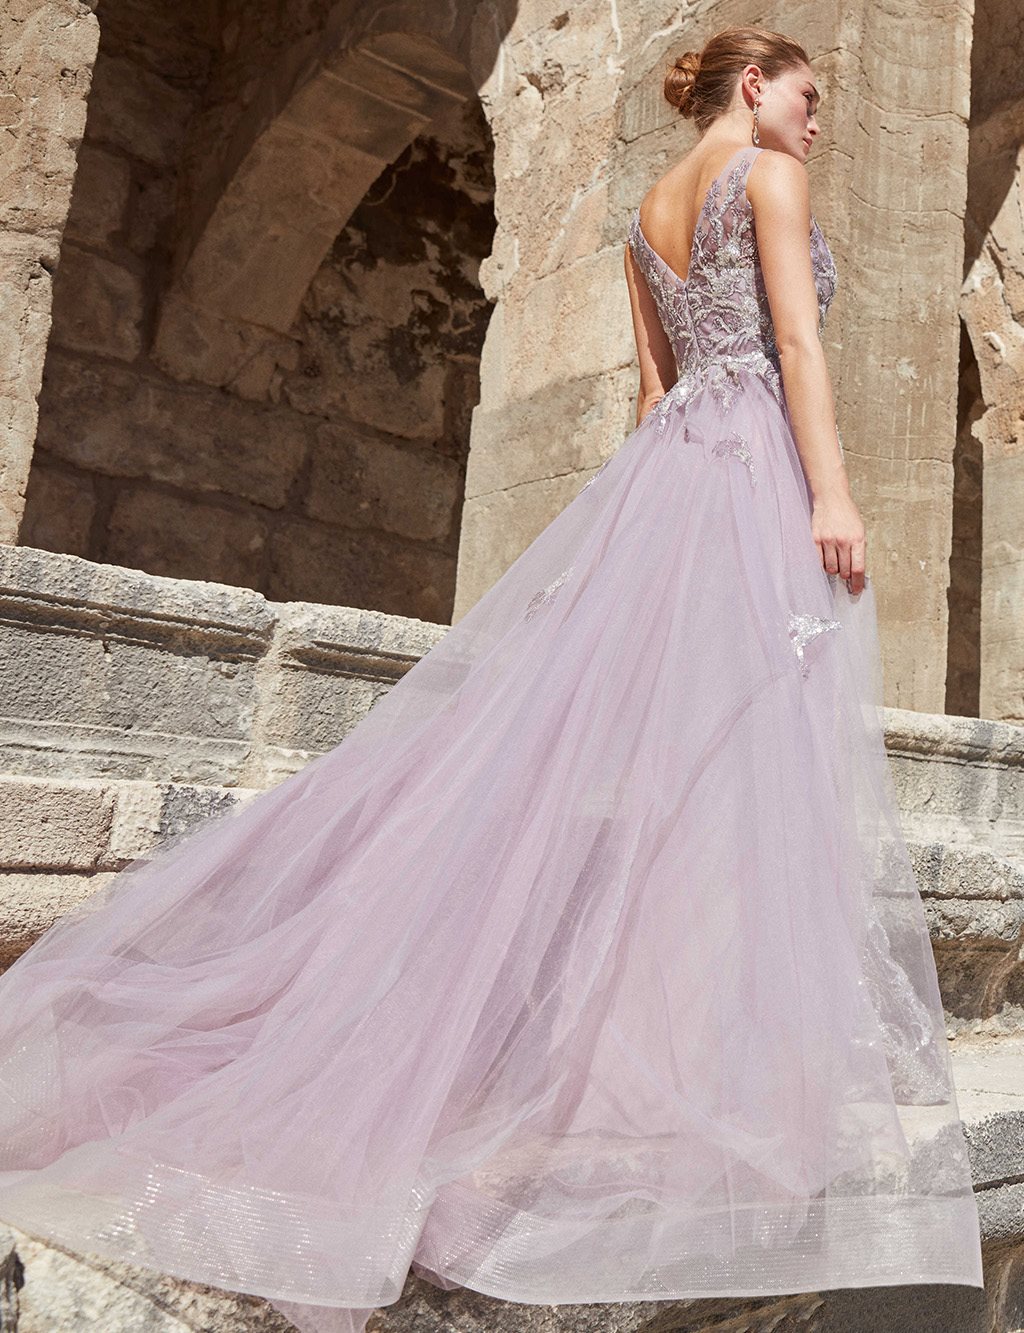 TIARA Low-Cut Back Evening Dress With Tail Pastel Lilac